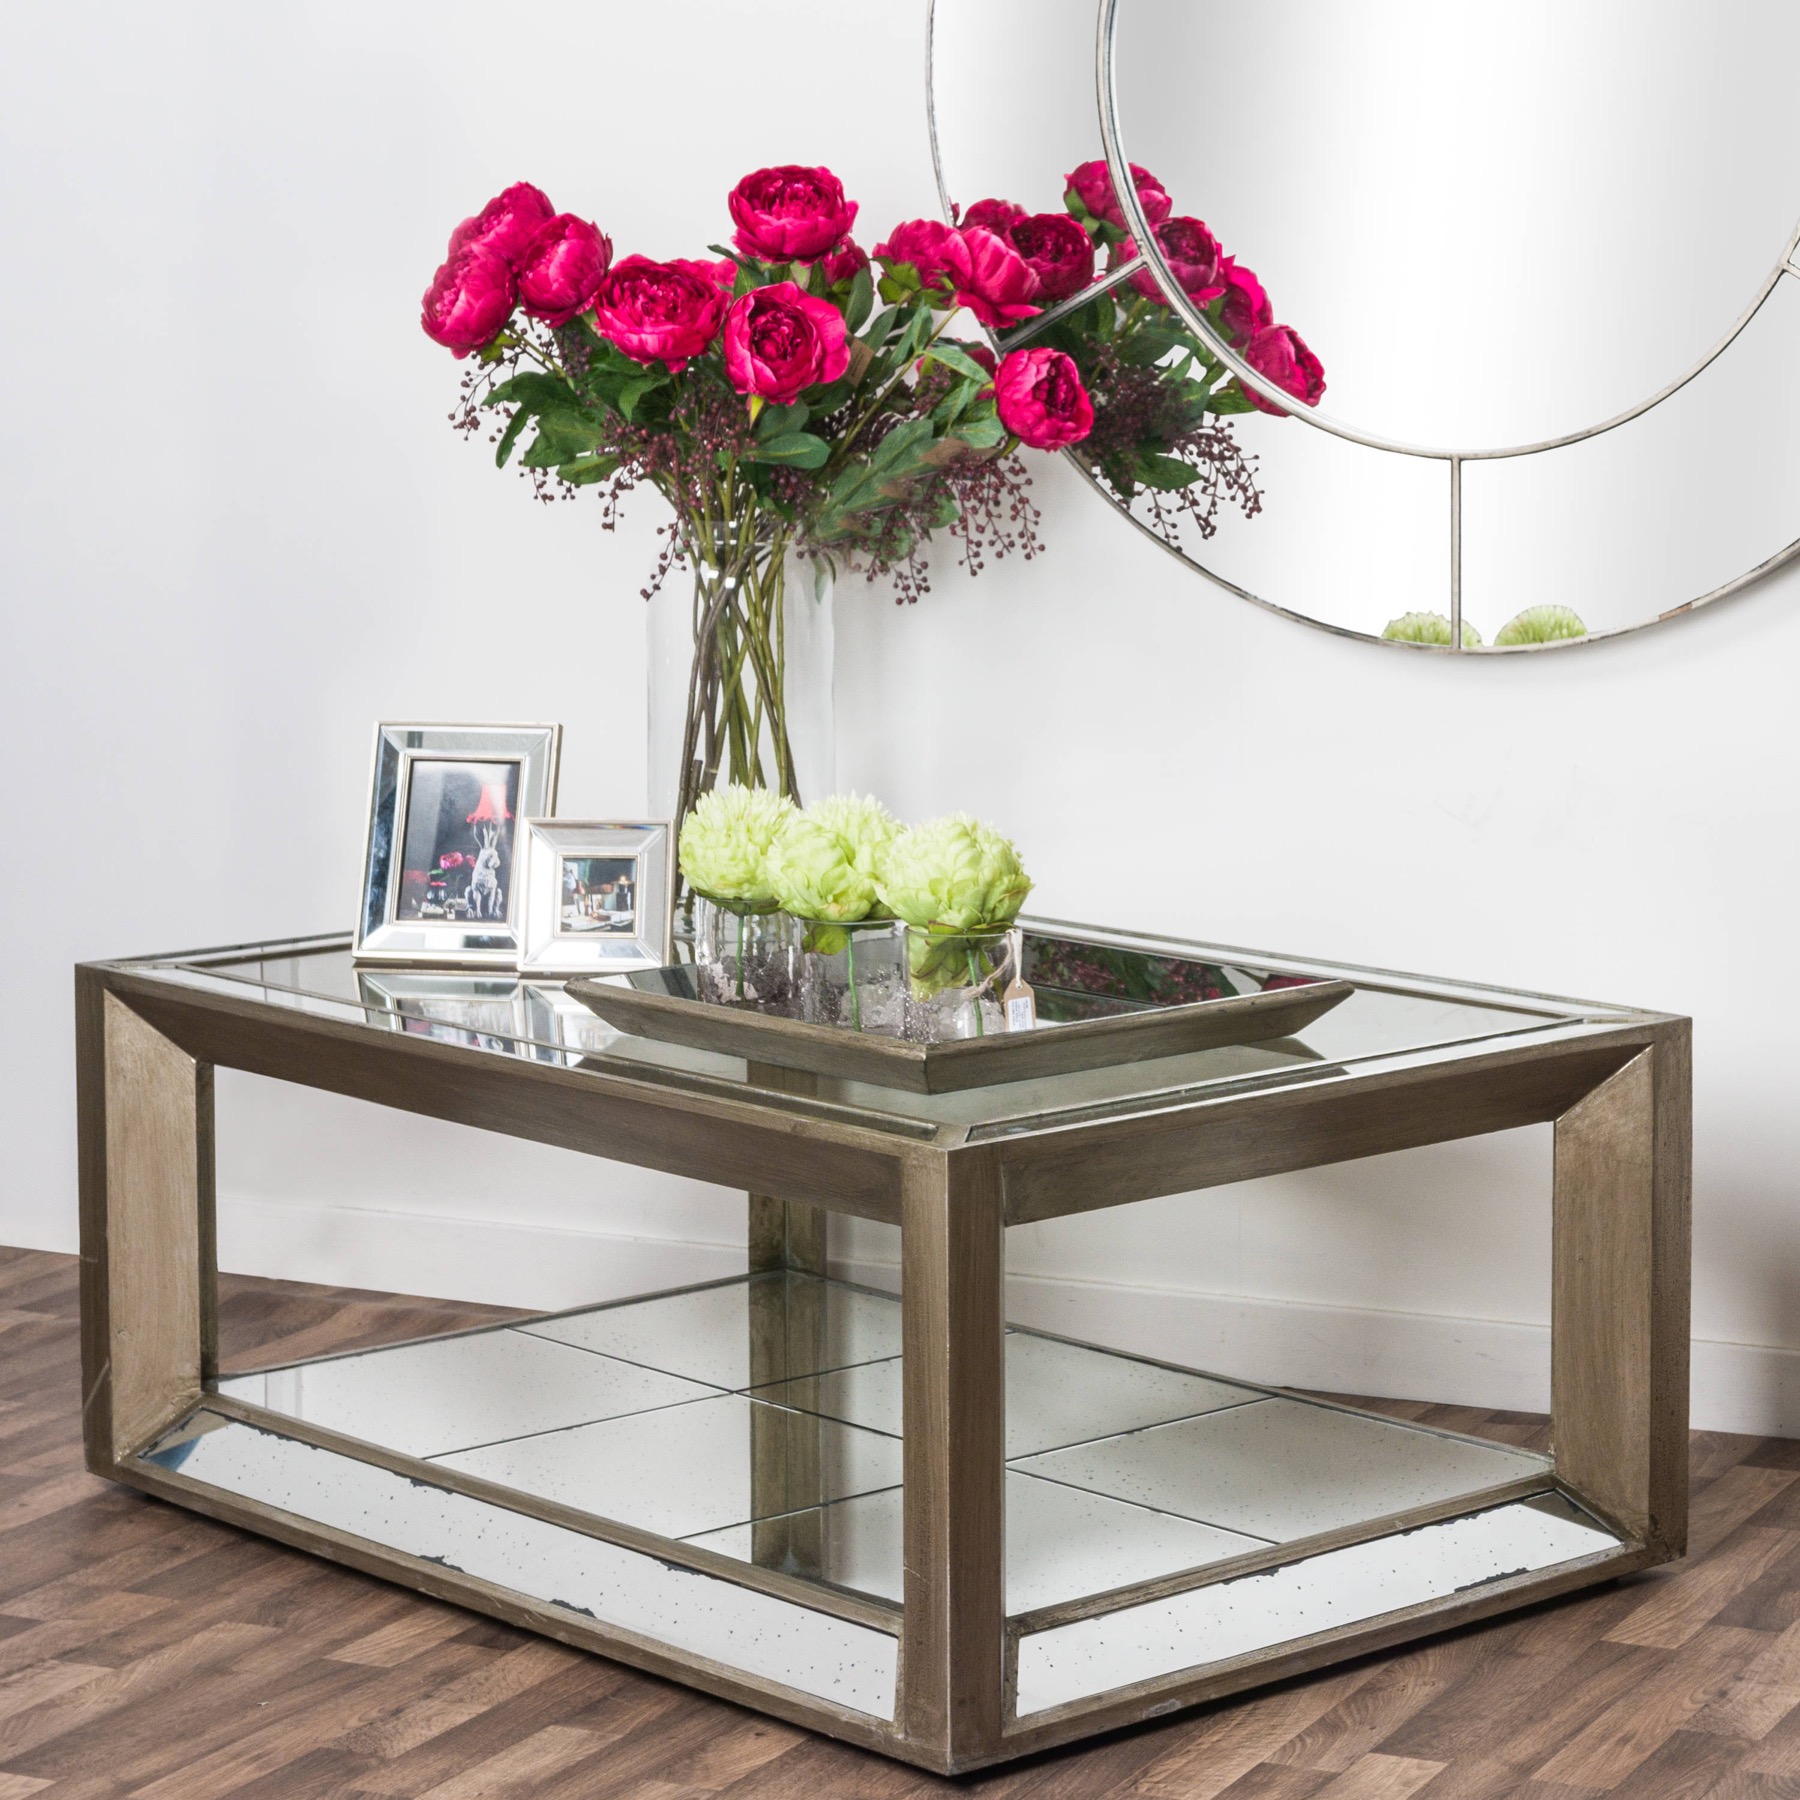 Large Augustus Mirrored Coffee Table - Image 5